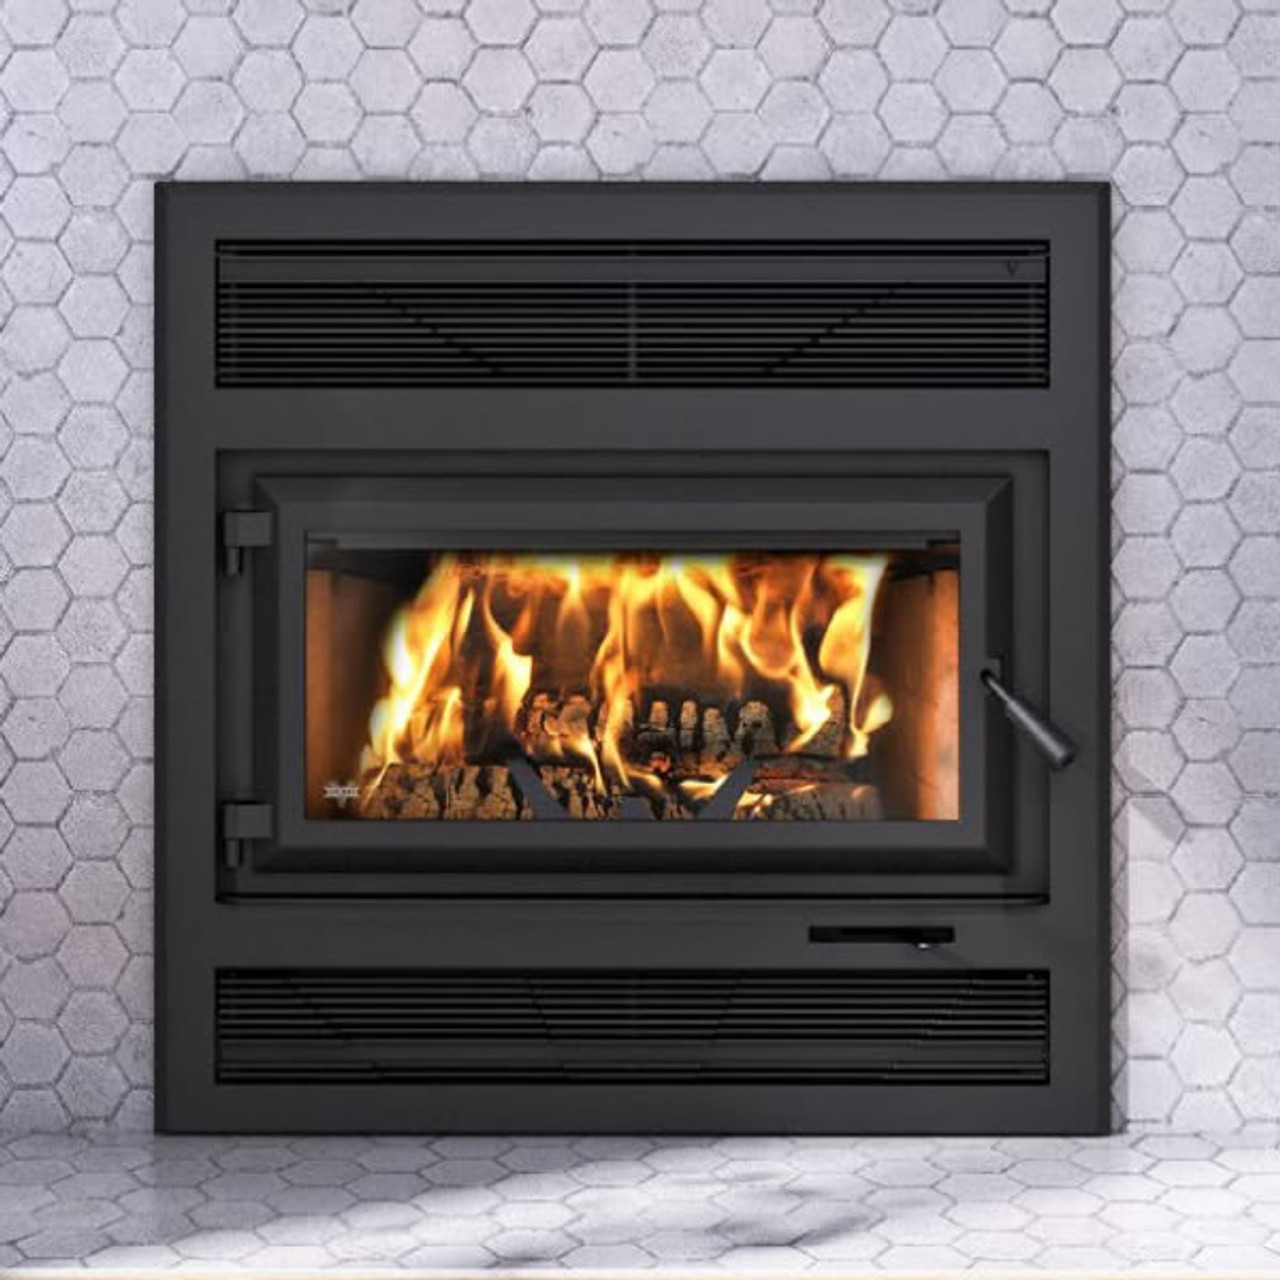 Ventis HE250R ZC Wood Fireplace with Blower and Required Face Plate